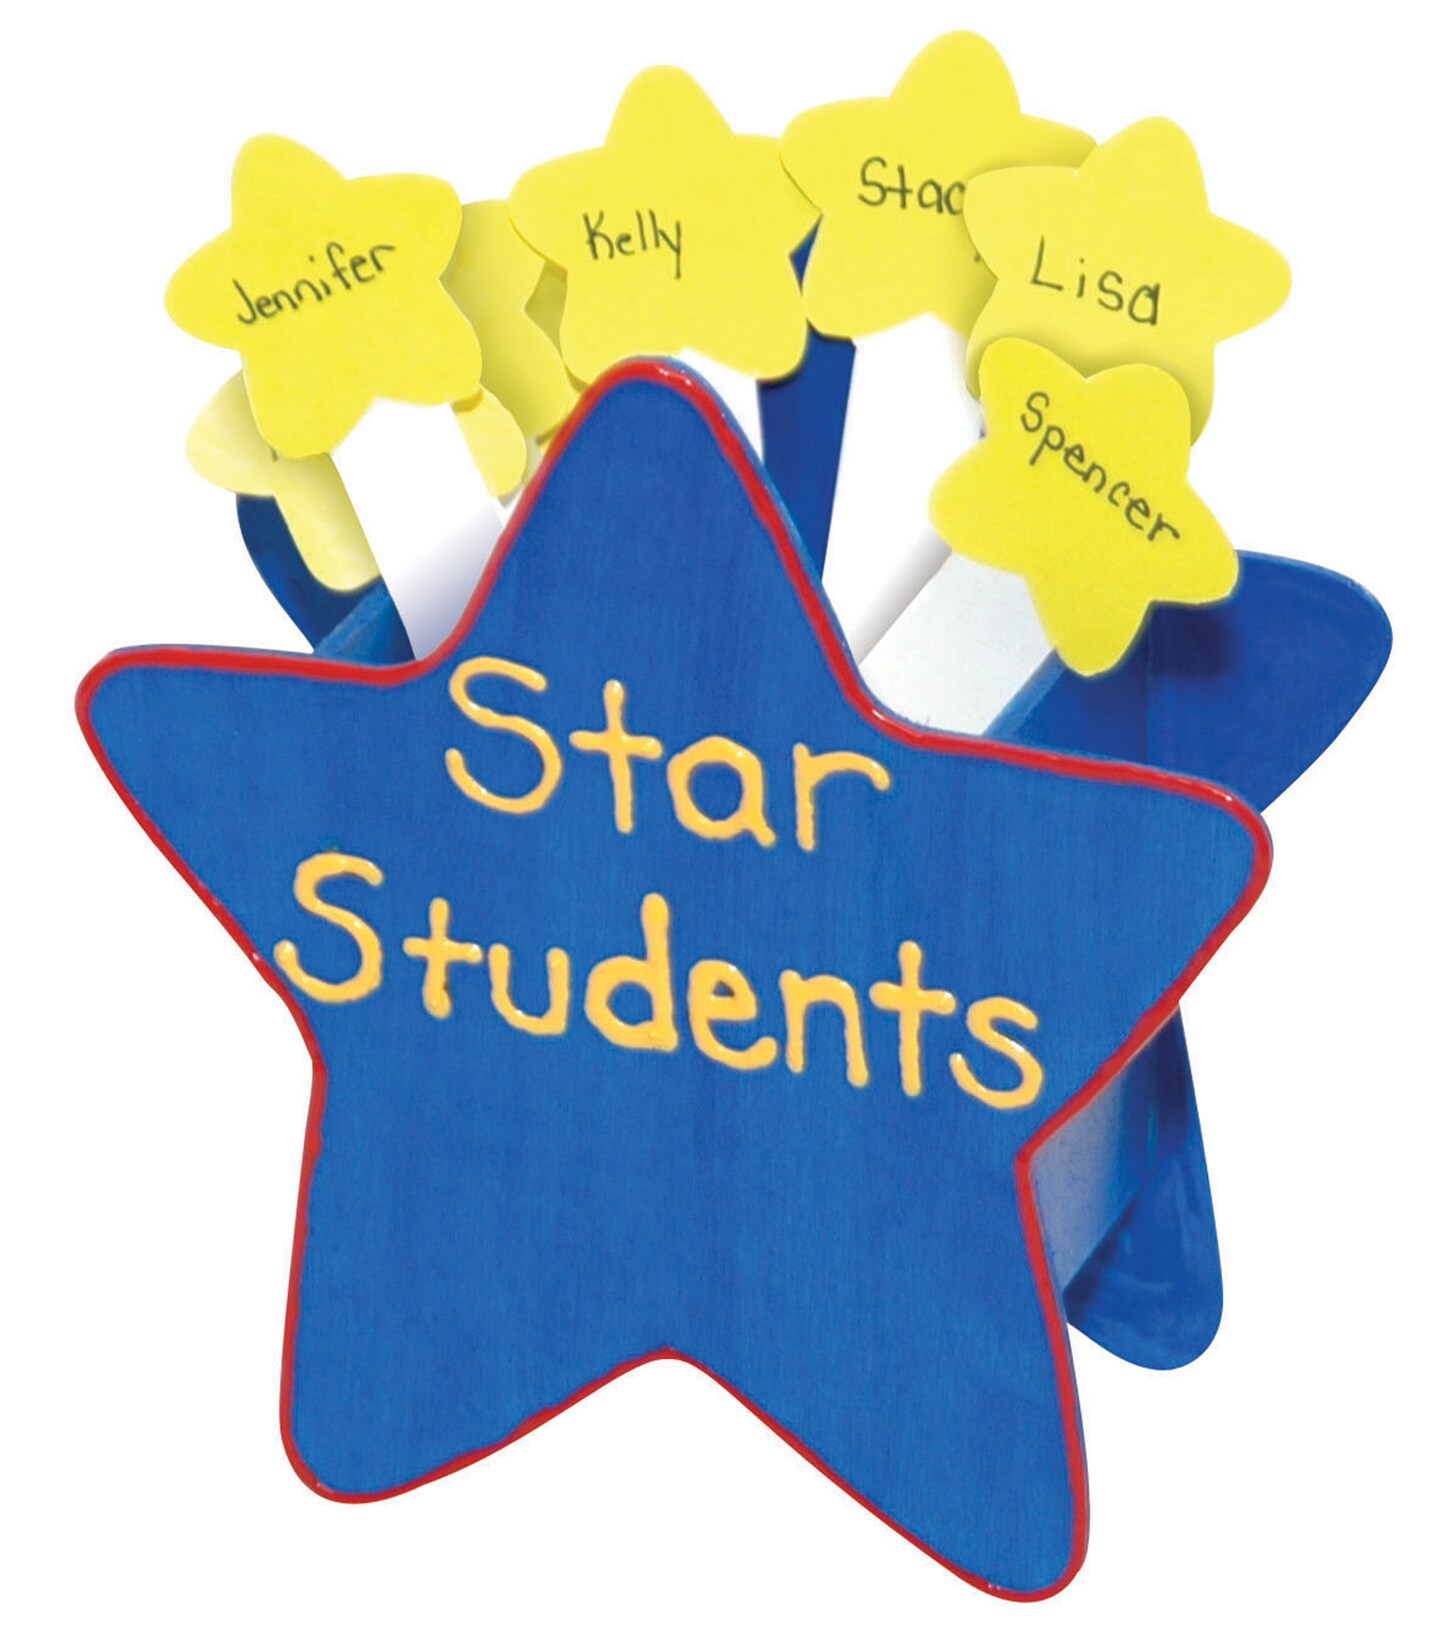 Carson Dellosa Dry-Erase Star Sticks Elementary Classroom Manipulative Set for Hands-on Learning Activities, Name Sticks, Behavior Management Tool for Classroom or Homeschool (30 pc)